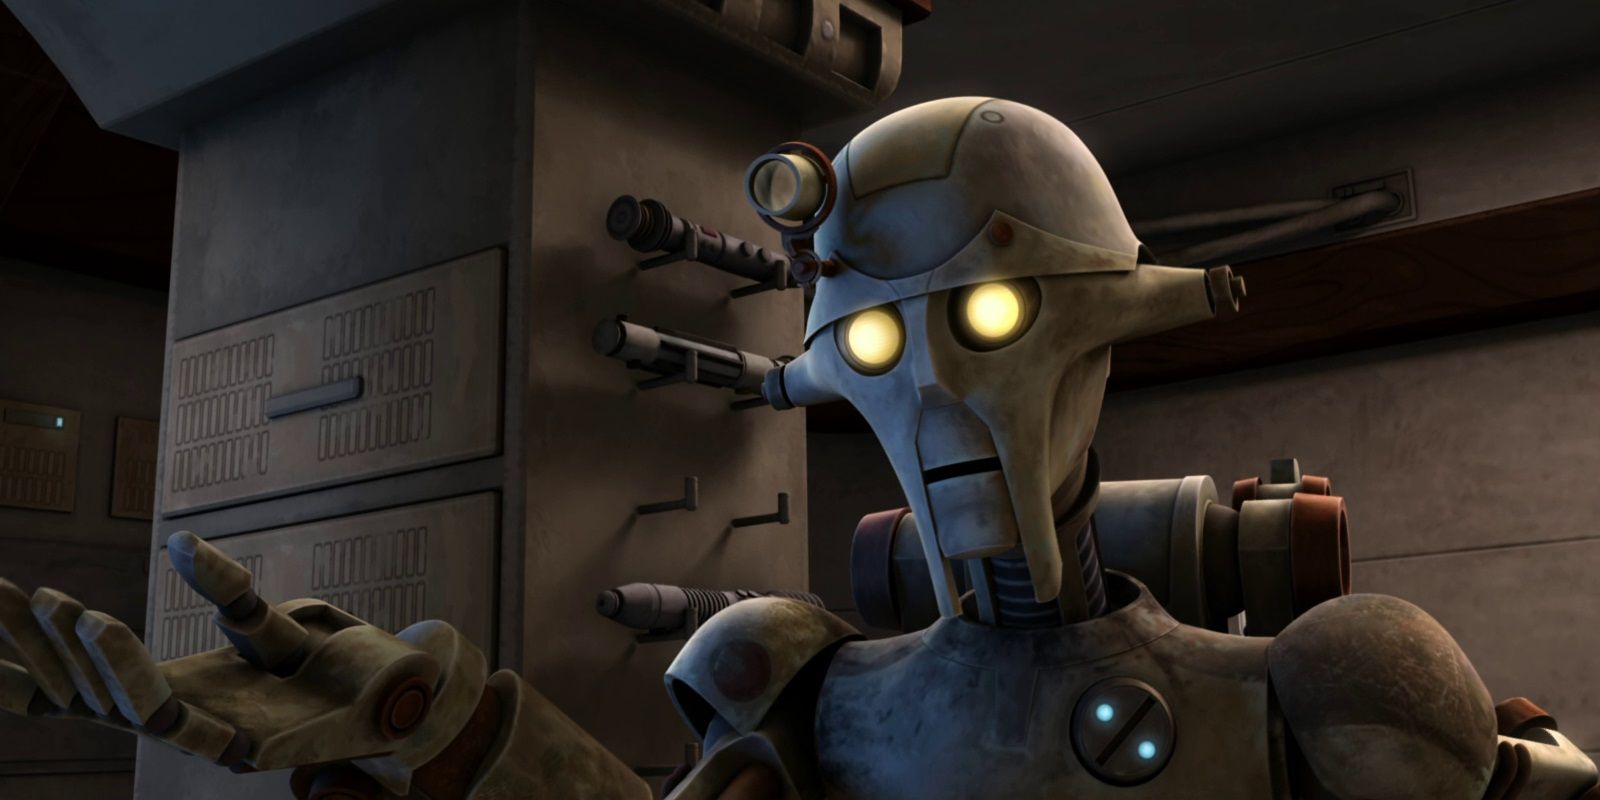 The droid Huyang from Star Wars: The Clone Wars, voiced by actor David Tennant.